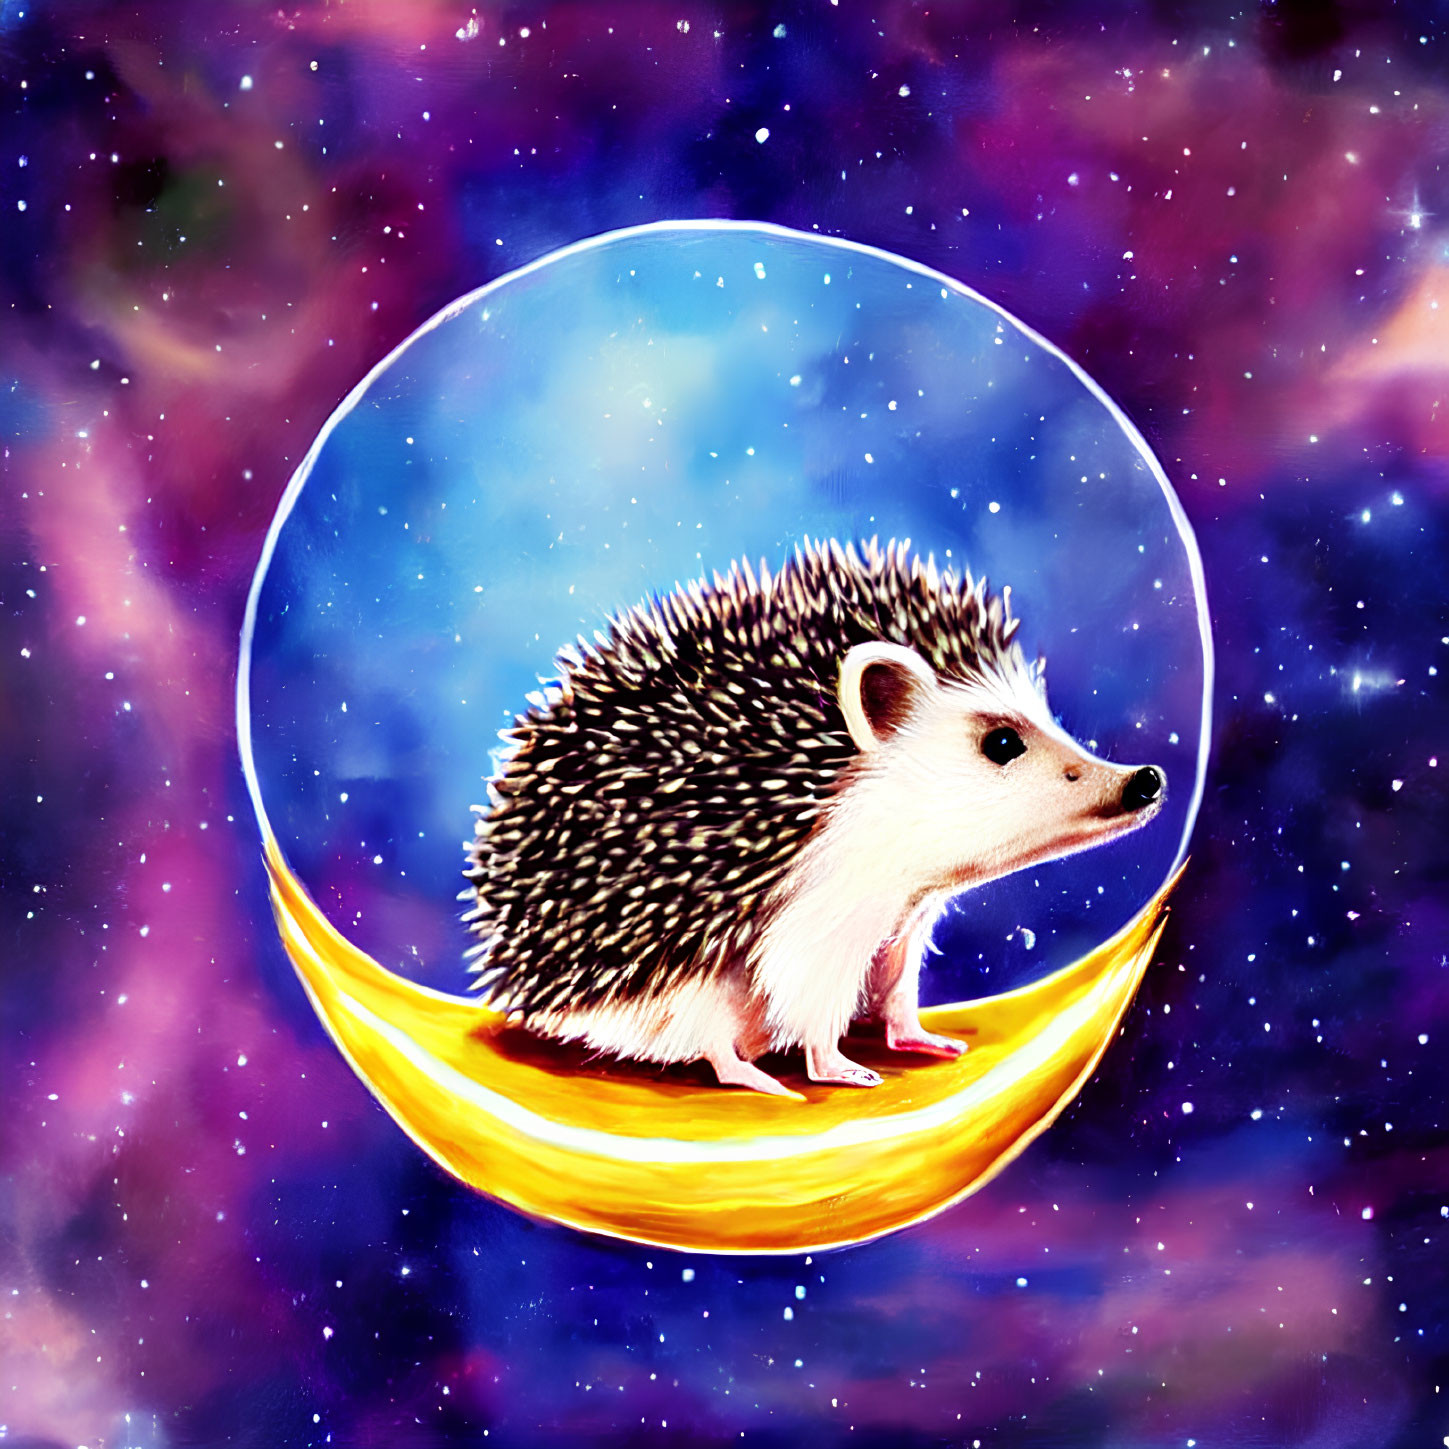 Adorable hedgehog on crescent moon in cosmic bubble scenery